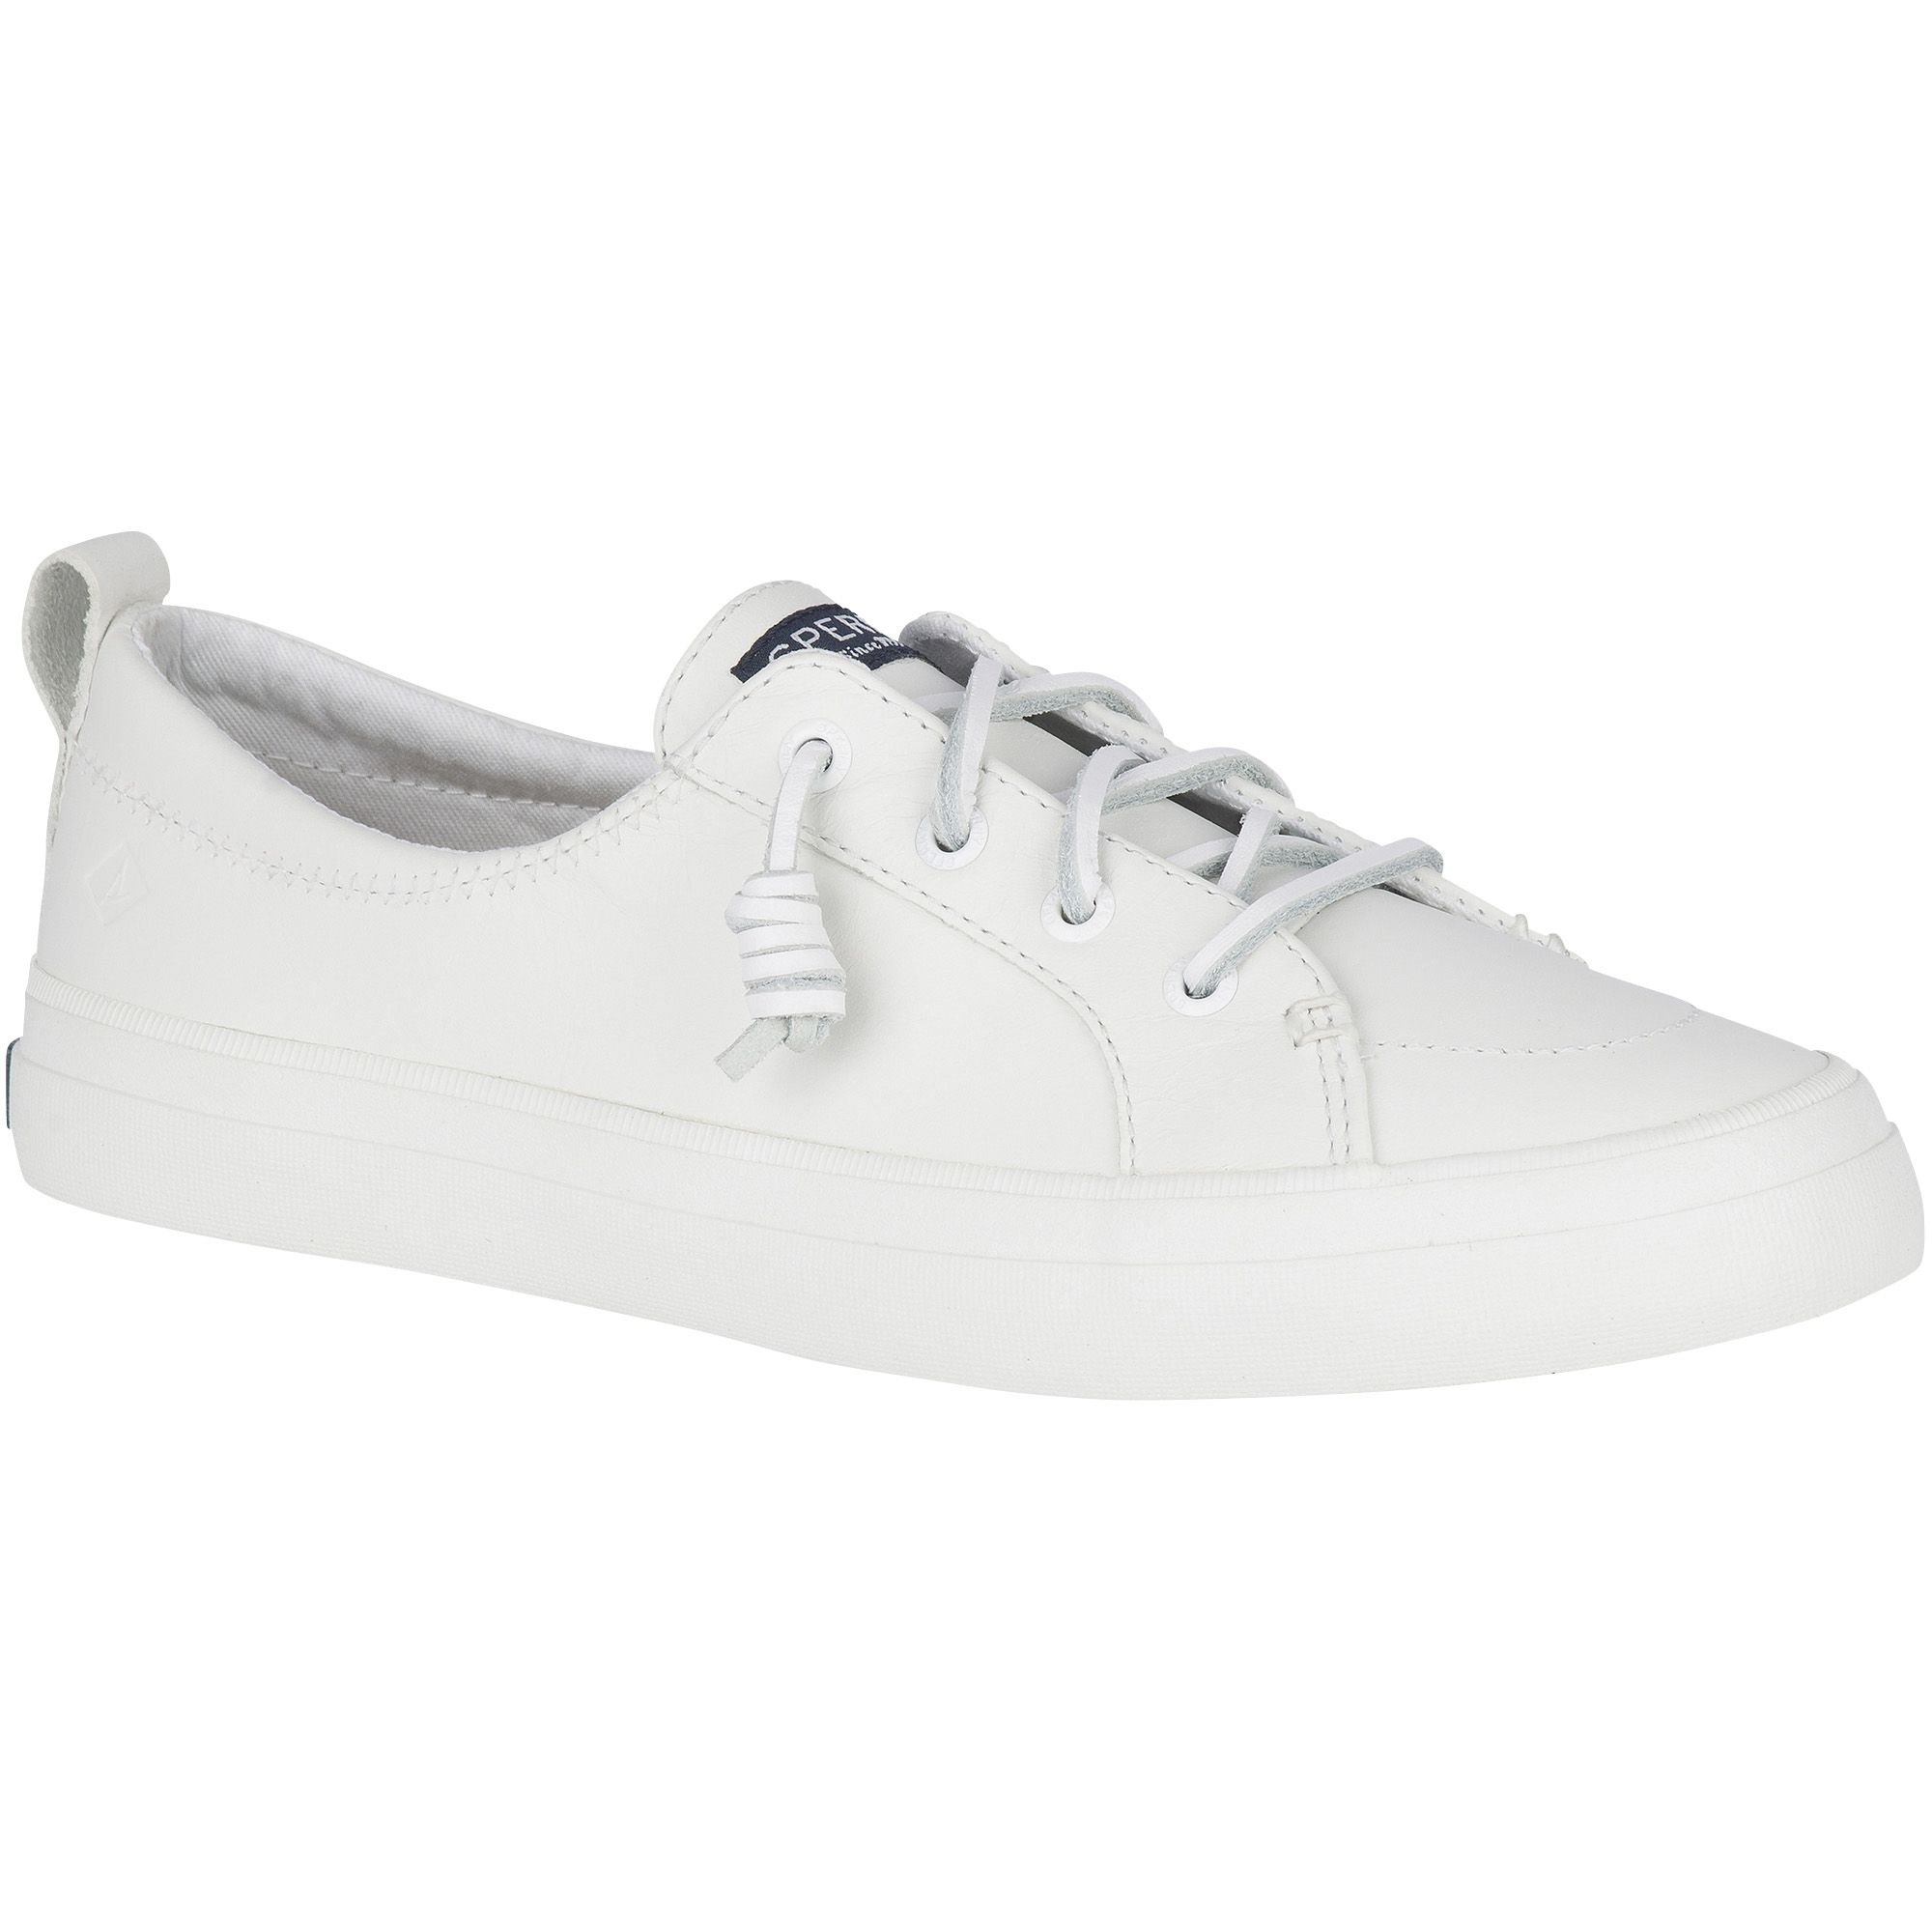 Sperry Womens Crest Vibe Leather Sneakers